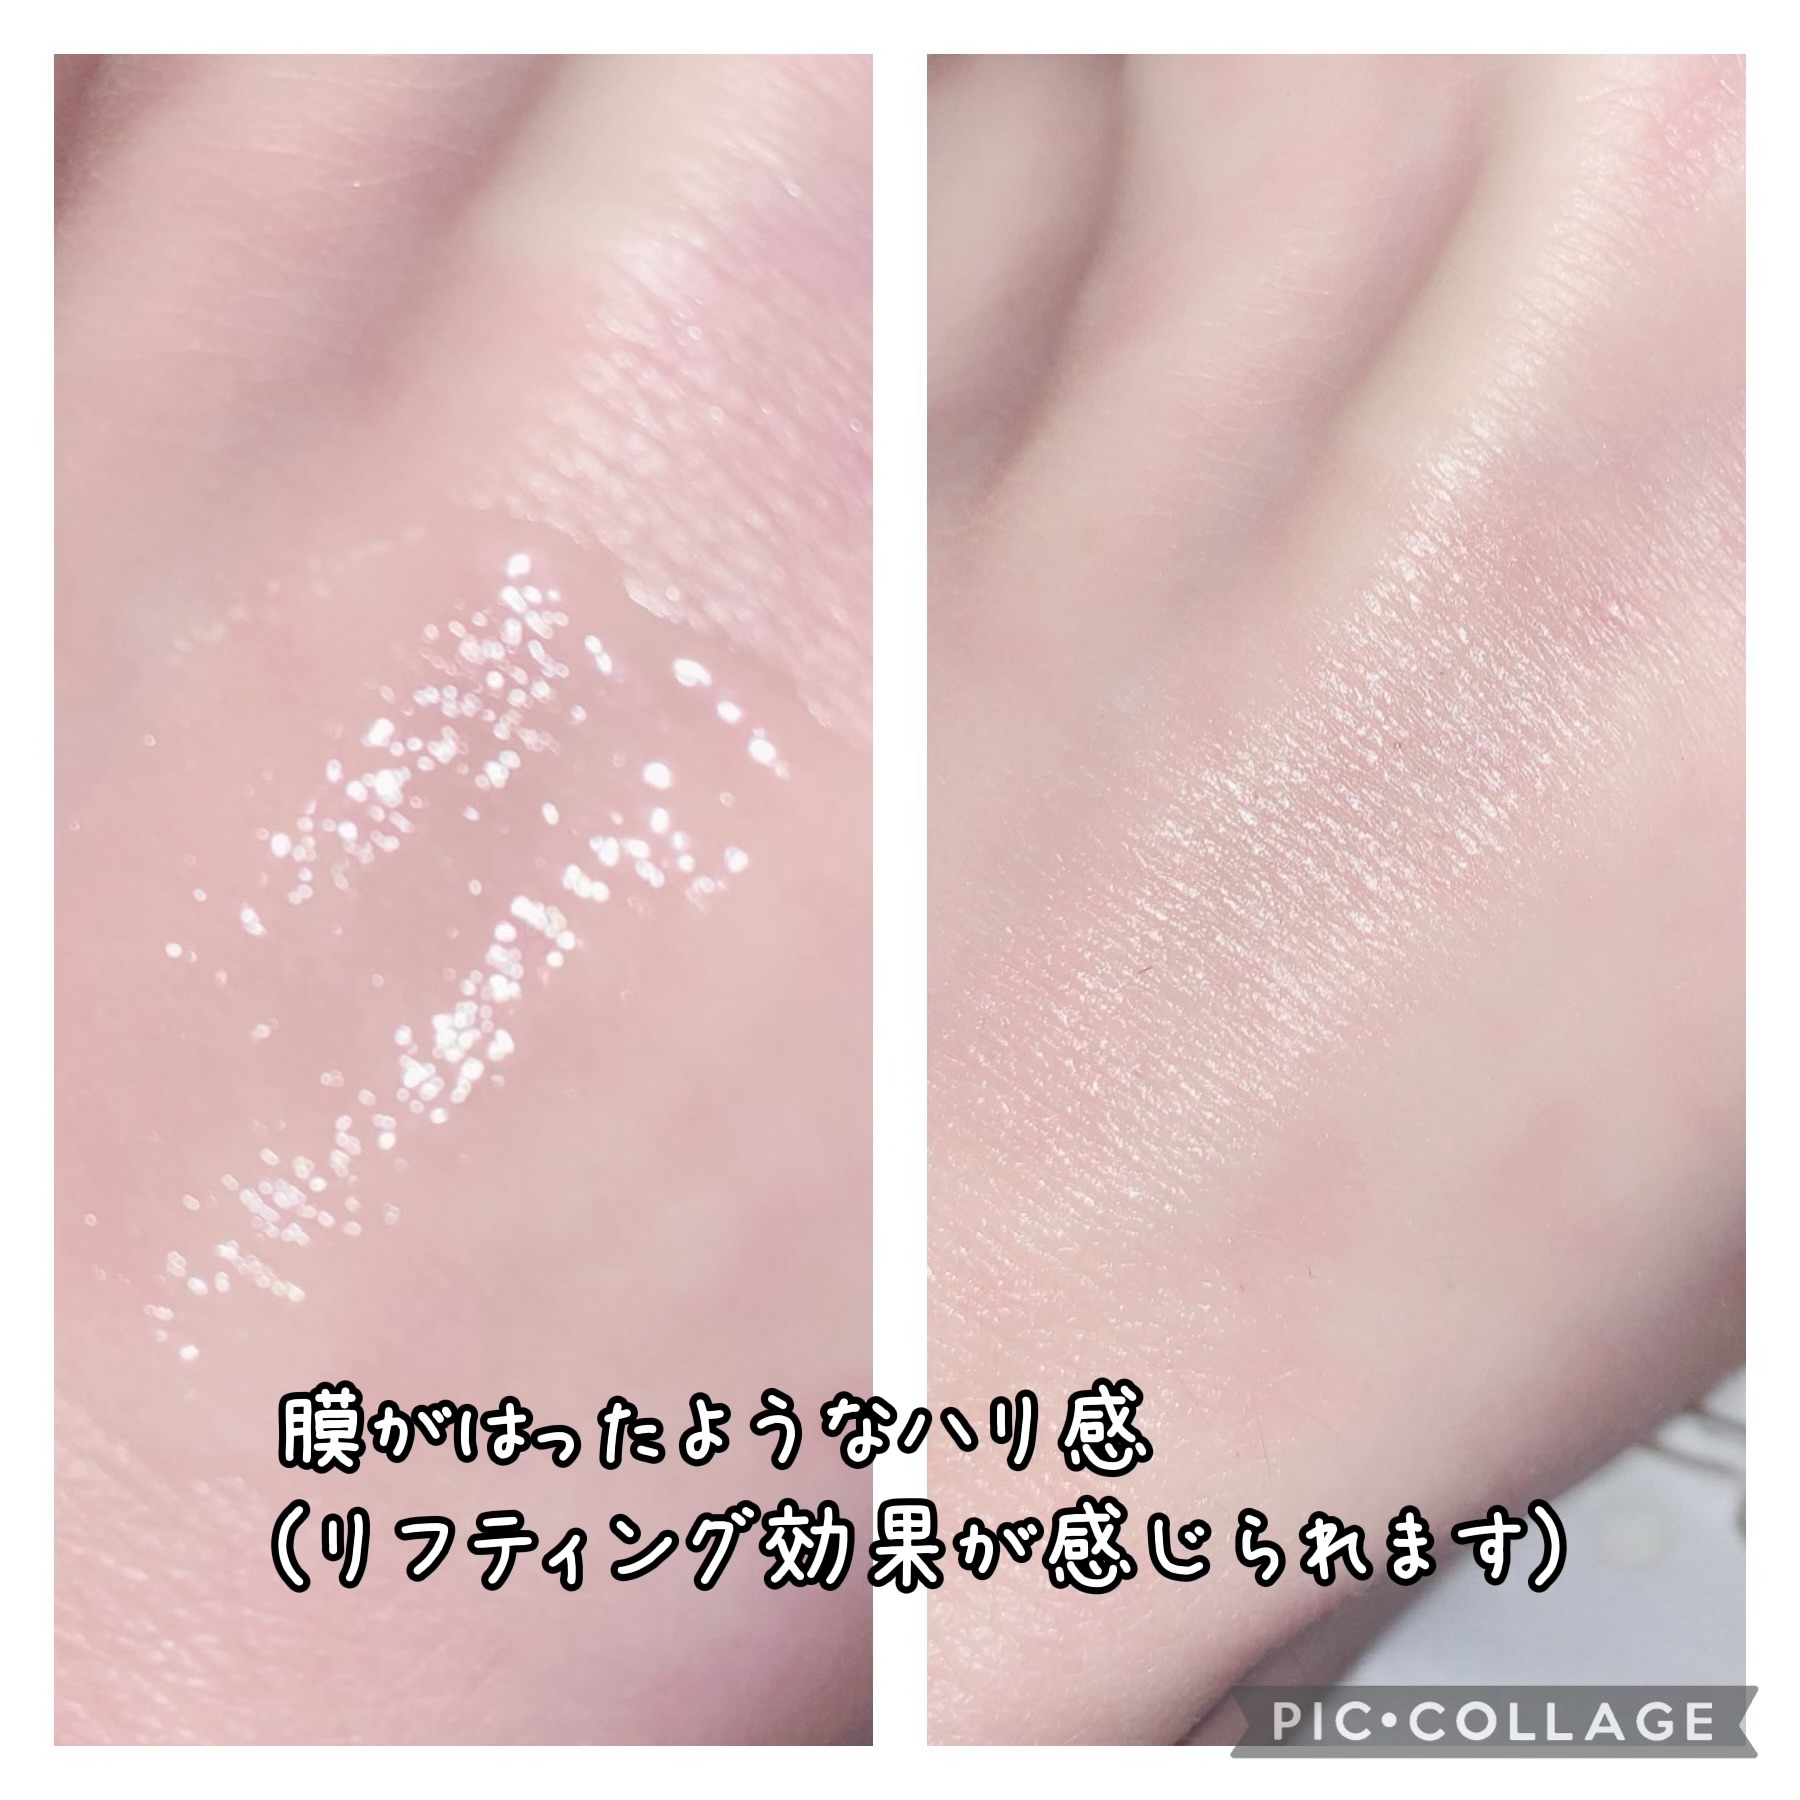 MAYBENA Perfect Lifting Protein Cream Ampoule 73を使った珈琲豆♡さんのクチコミ画像4